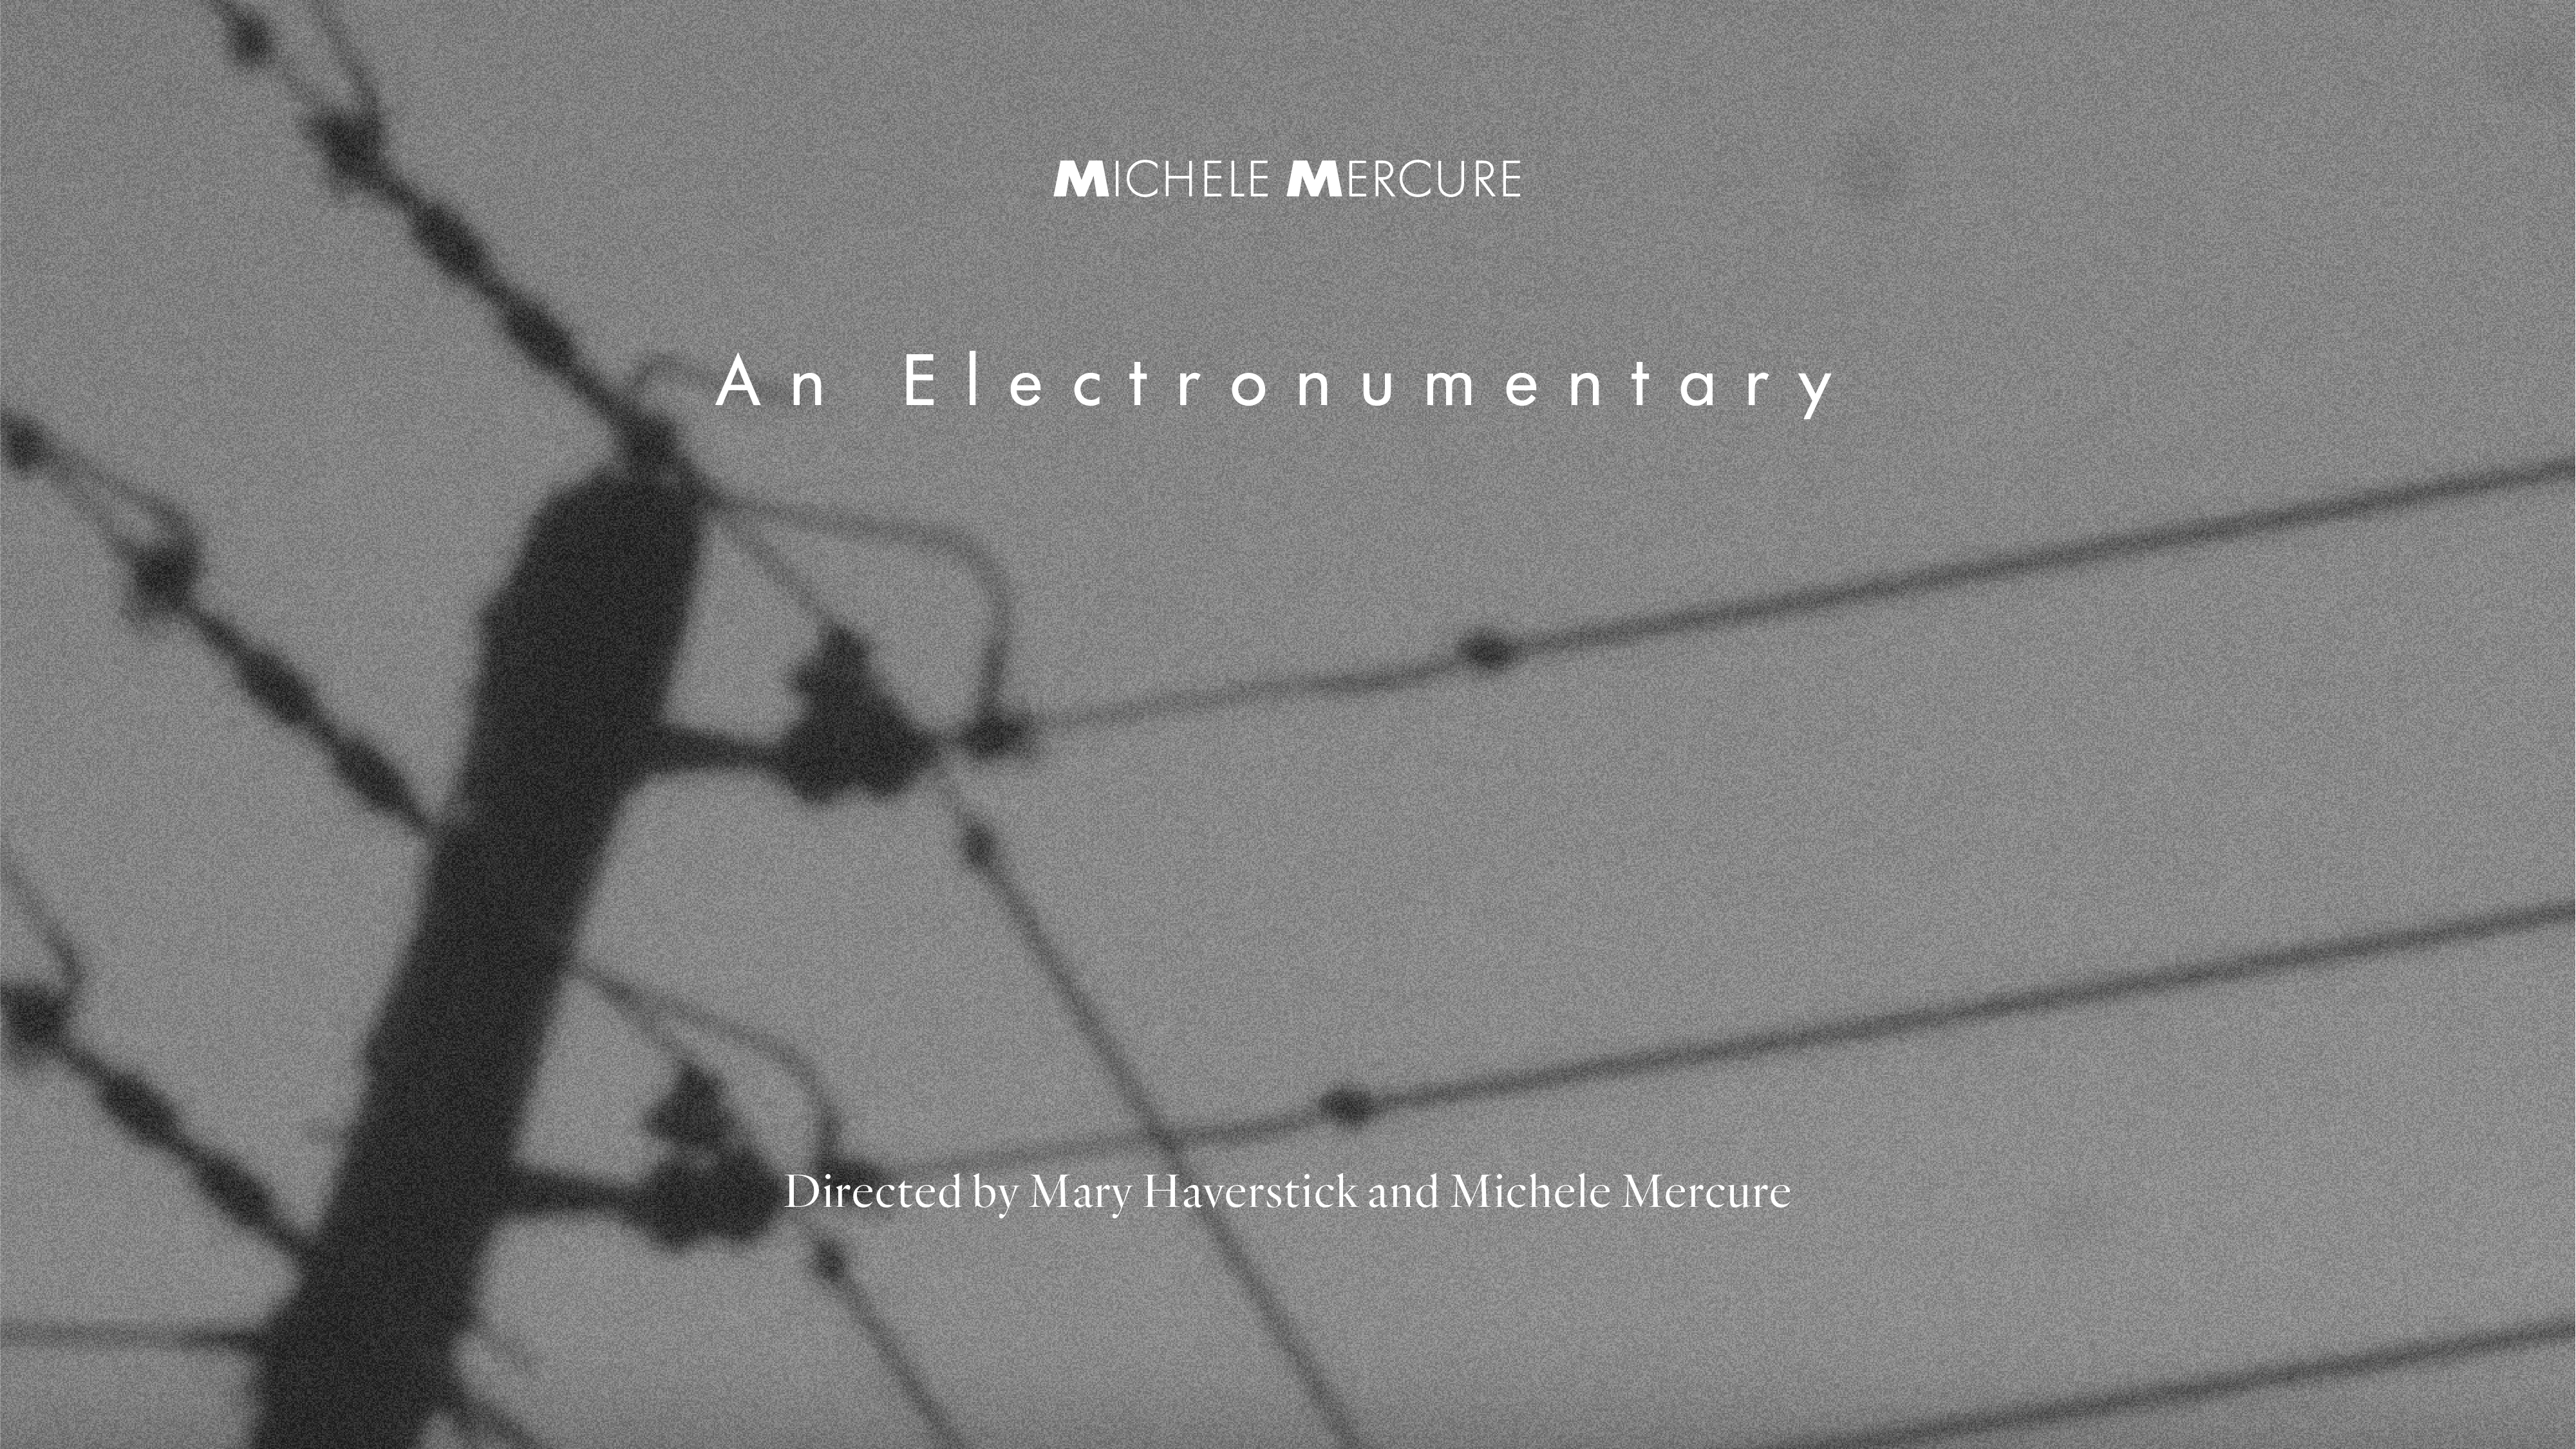 Link to Video for Michele Mercure – An Electronumentary